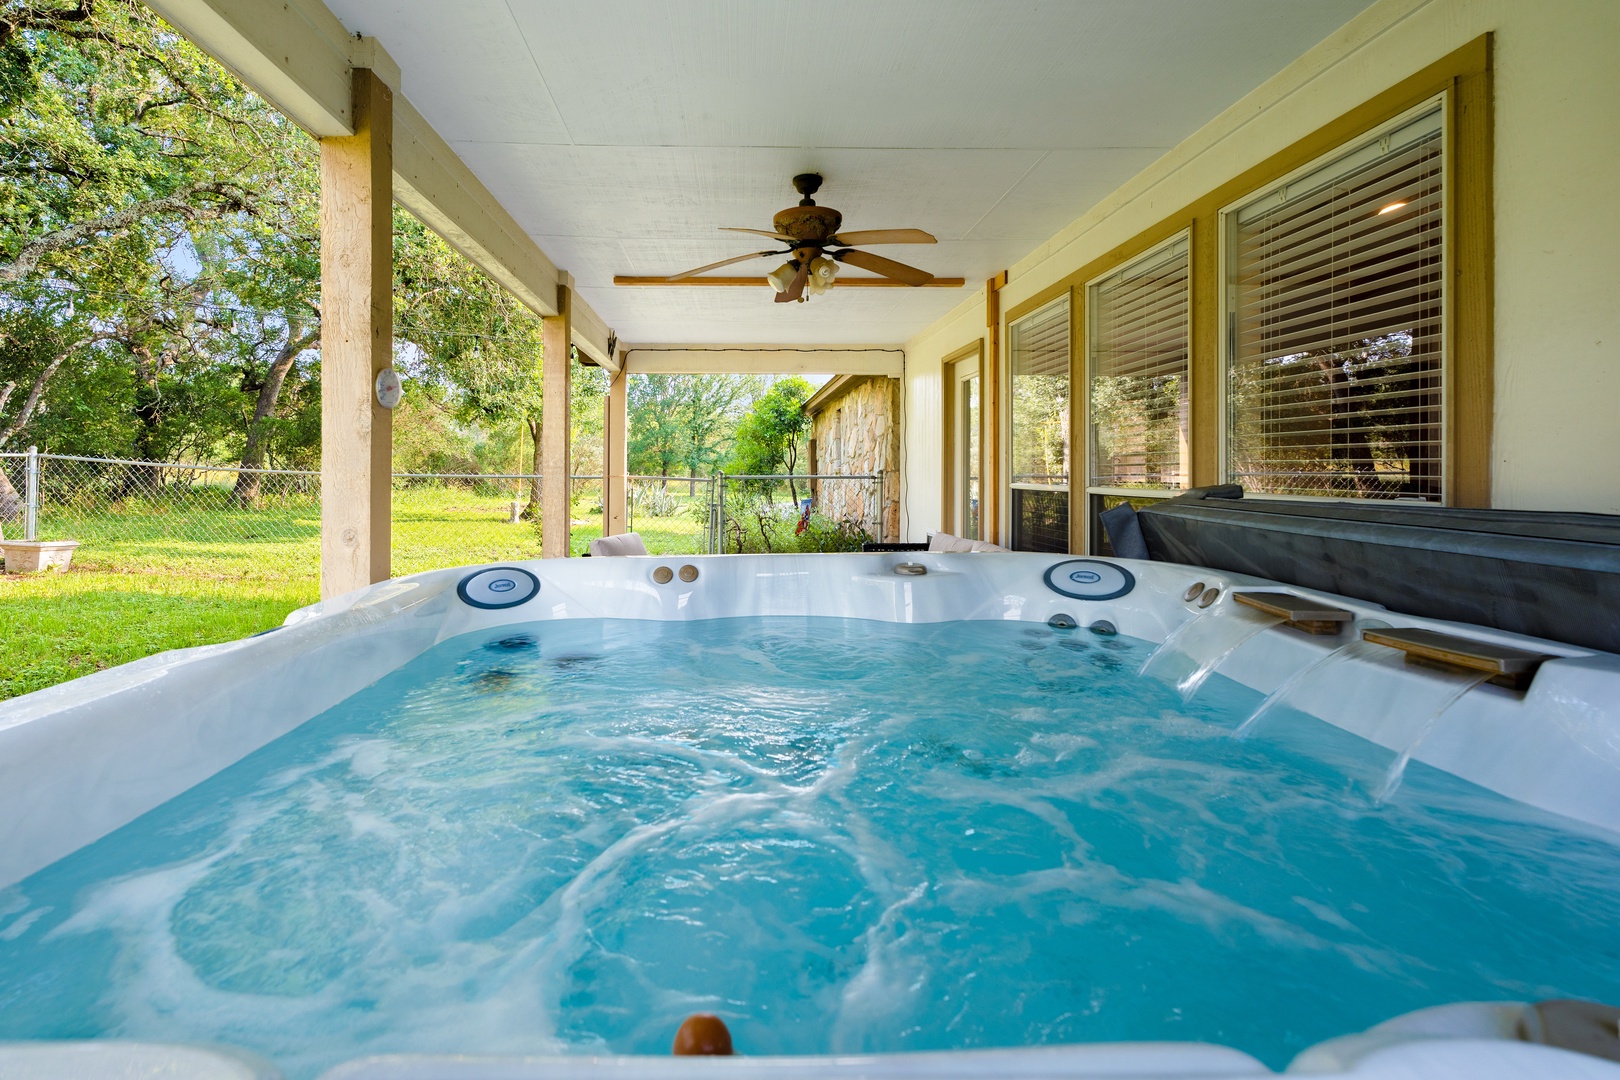 Soak the day away in the covered, private hot tub